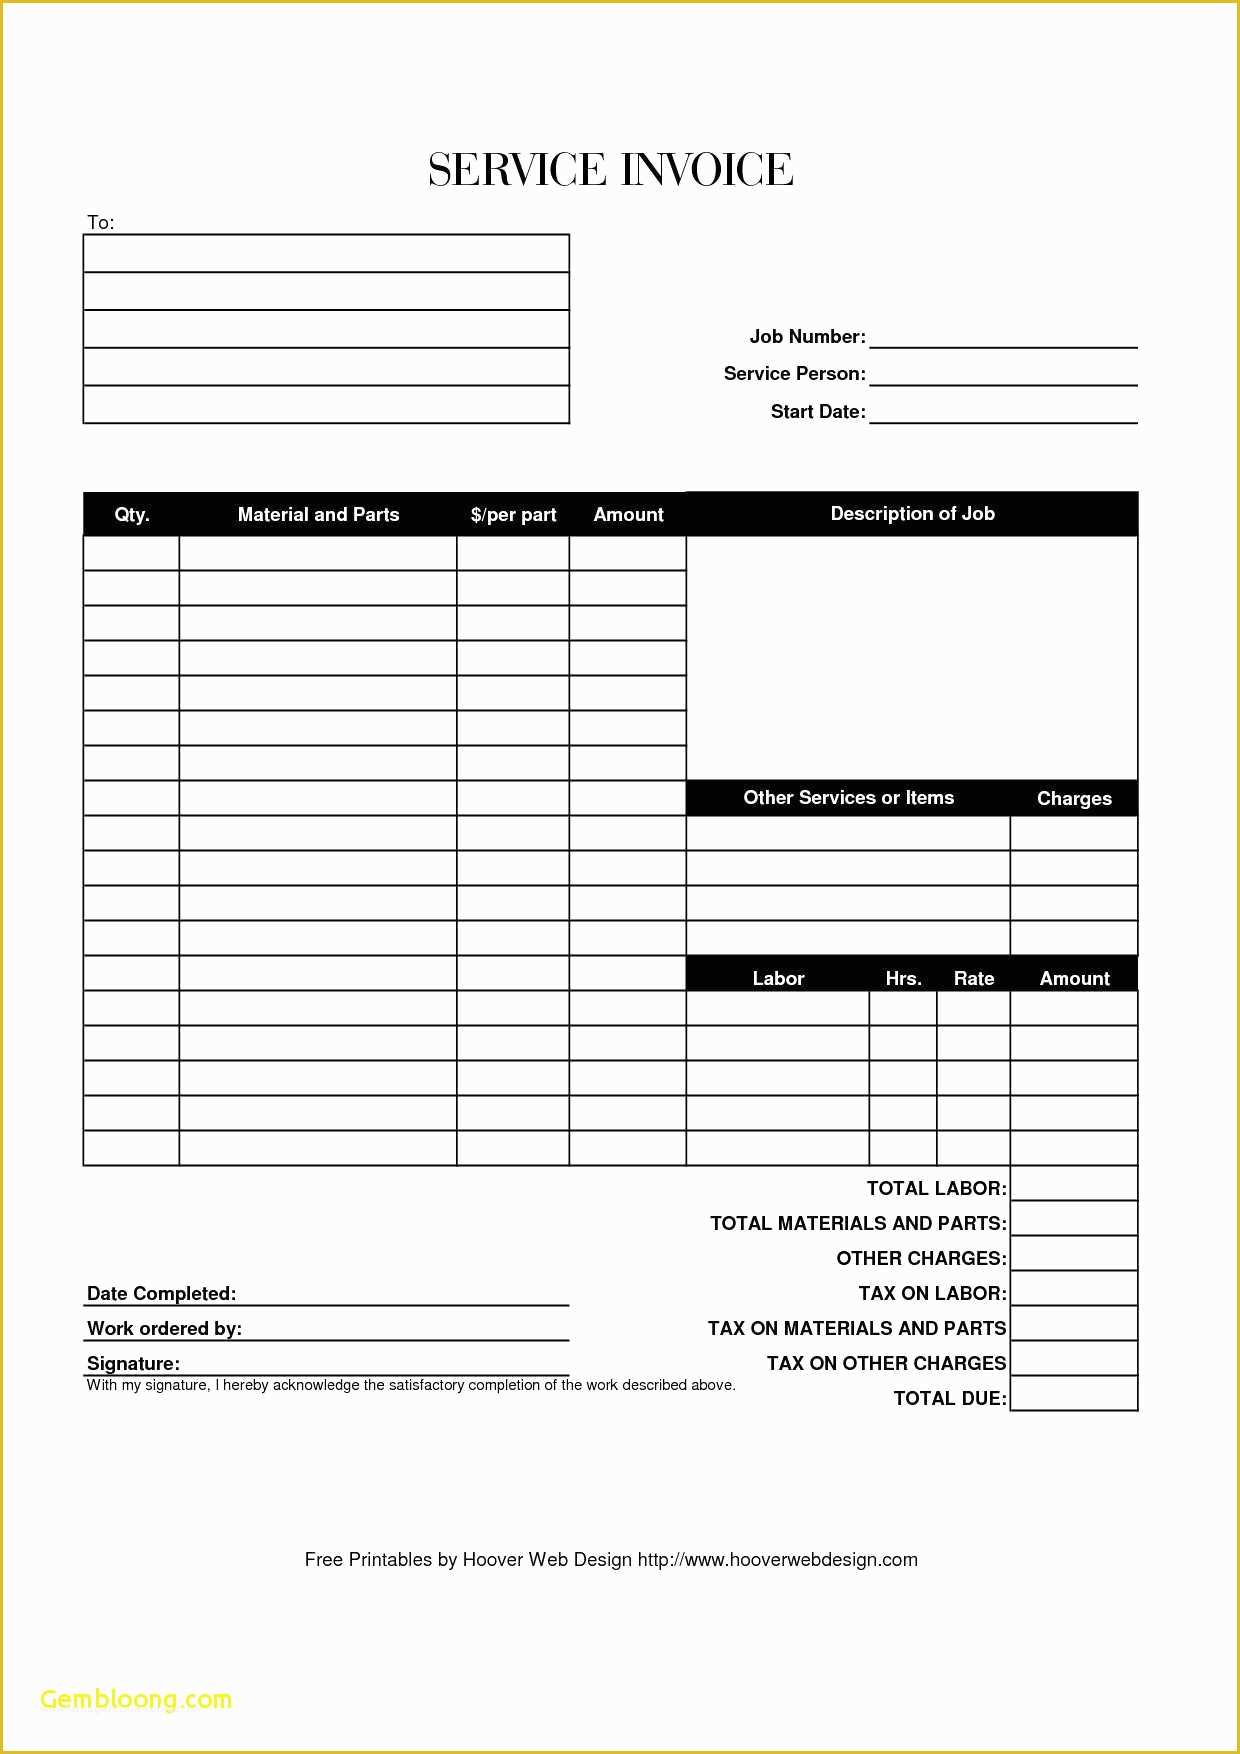 Free Appliance Repair Invoice Template Of Awesome Paintless Dent Repair Invoice Template